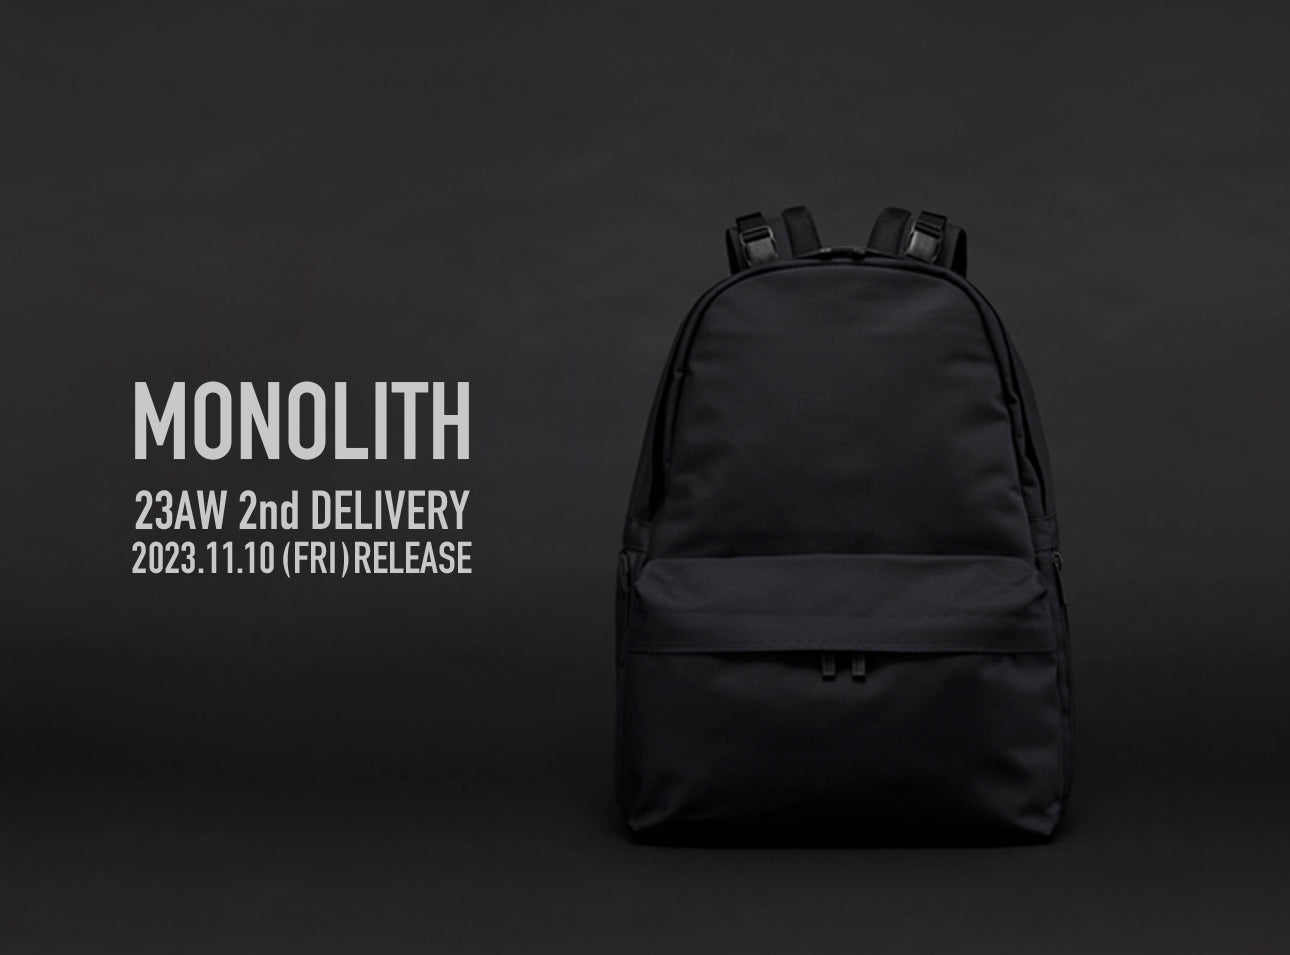 MONOLITH 2023 AW 2nd DELIVERY